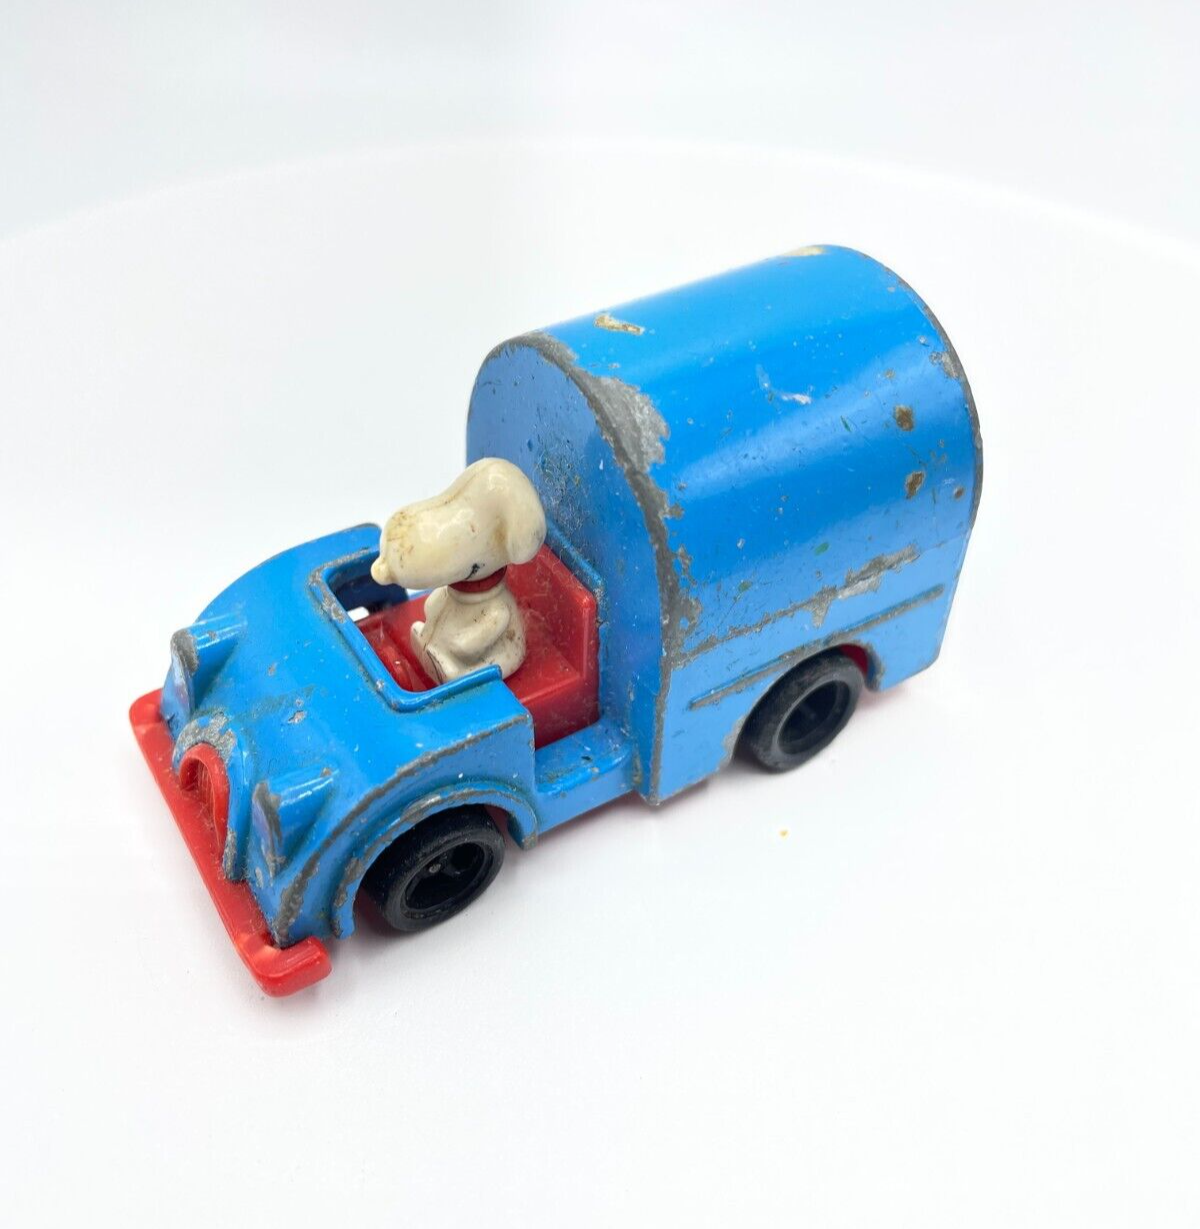 Primary image for Vintage Peanuts Snoopy Diescast Mail Truck Aviva 1958 Blue Car Japan No. C-21